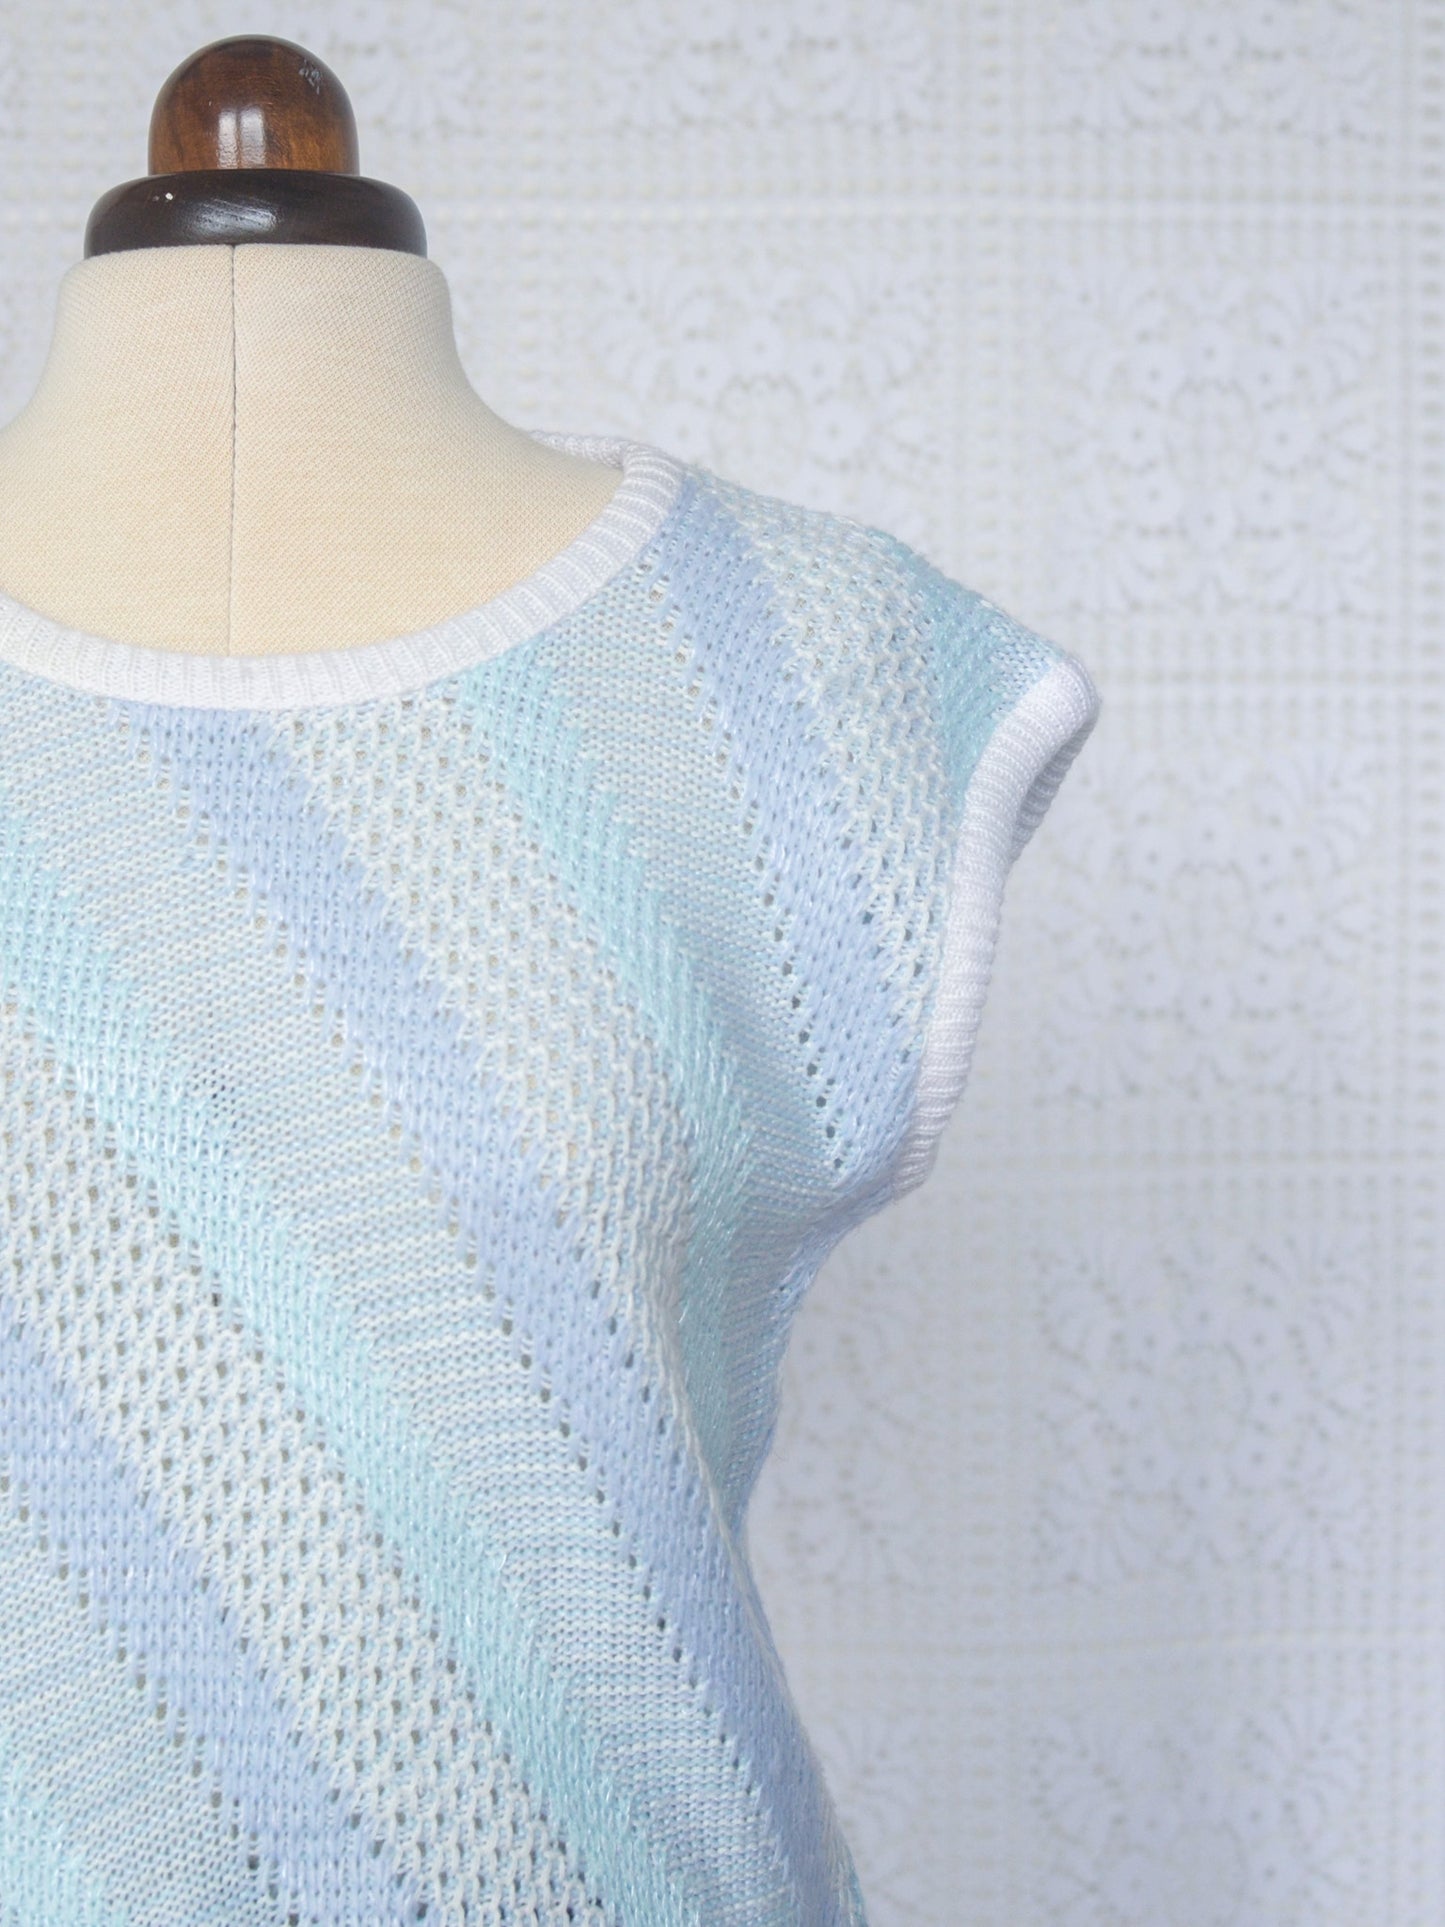 1980s style pale blue and white diagonal stripe cropped sleeveless jumper